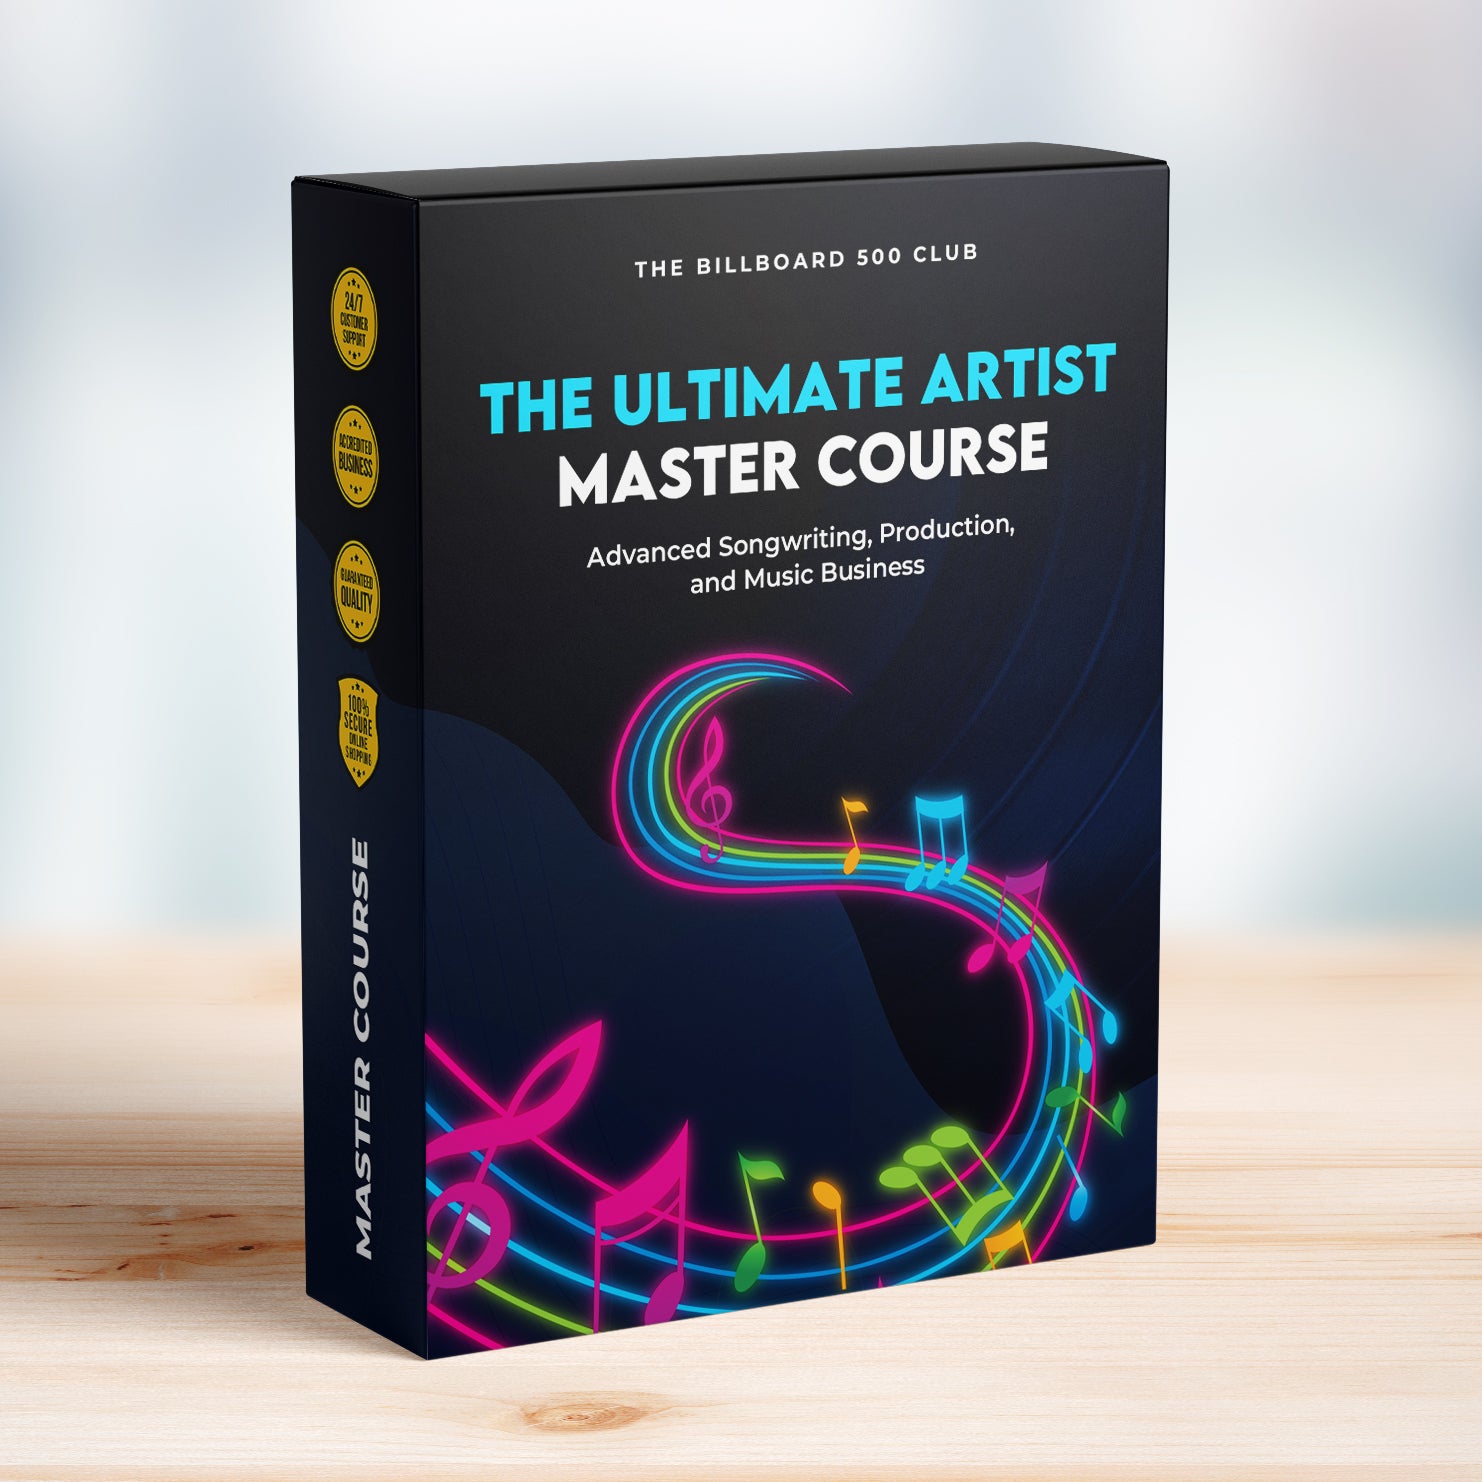 The Ultimate Artist Master Course (Advanced Songwriting, Production, and Music Business) - The Billboard 500 Club